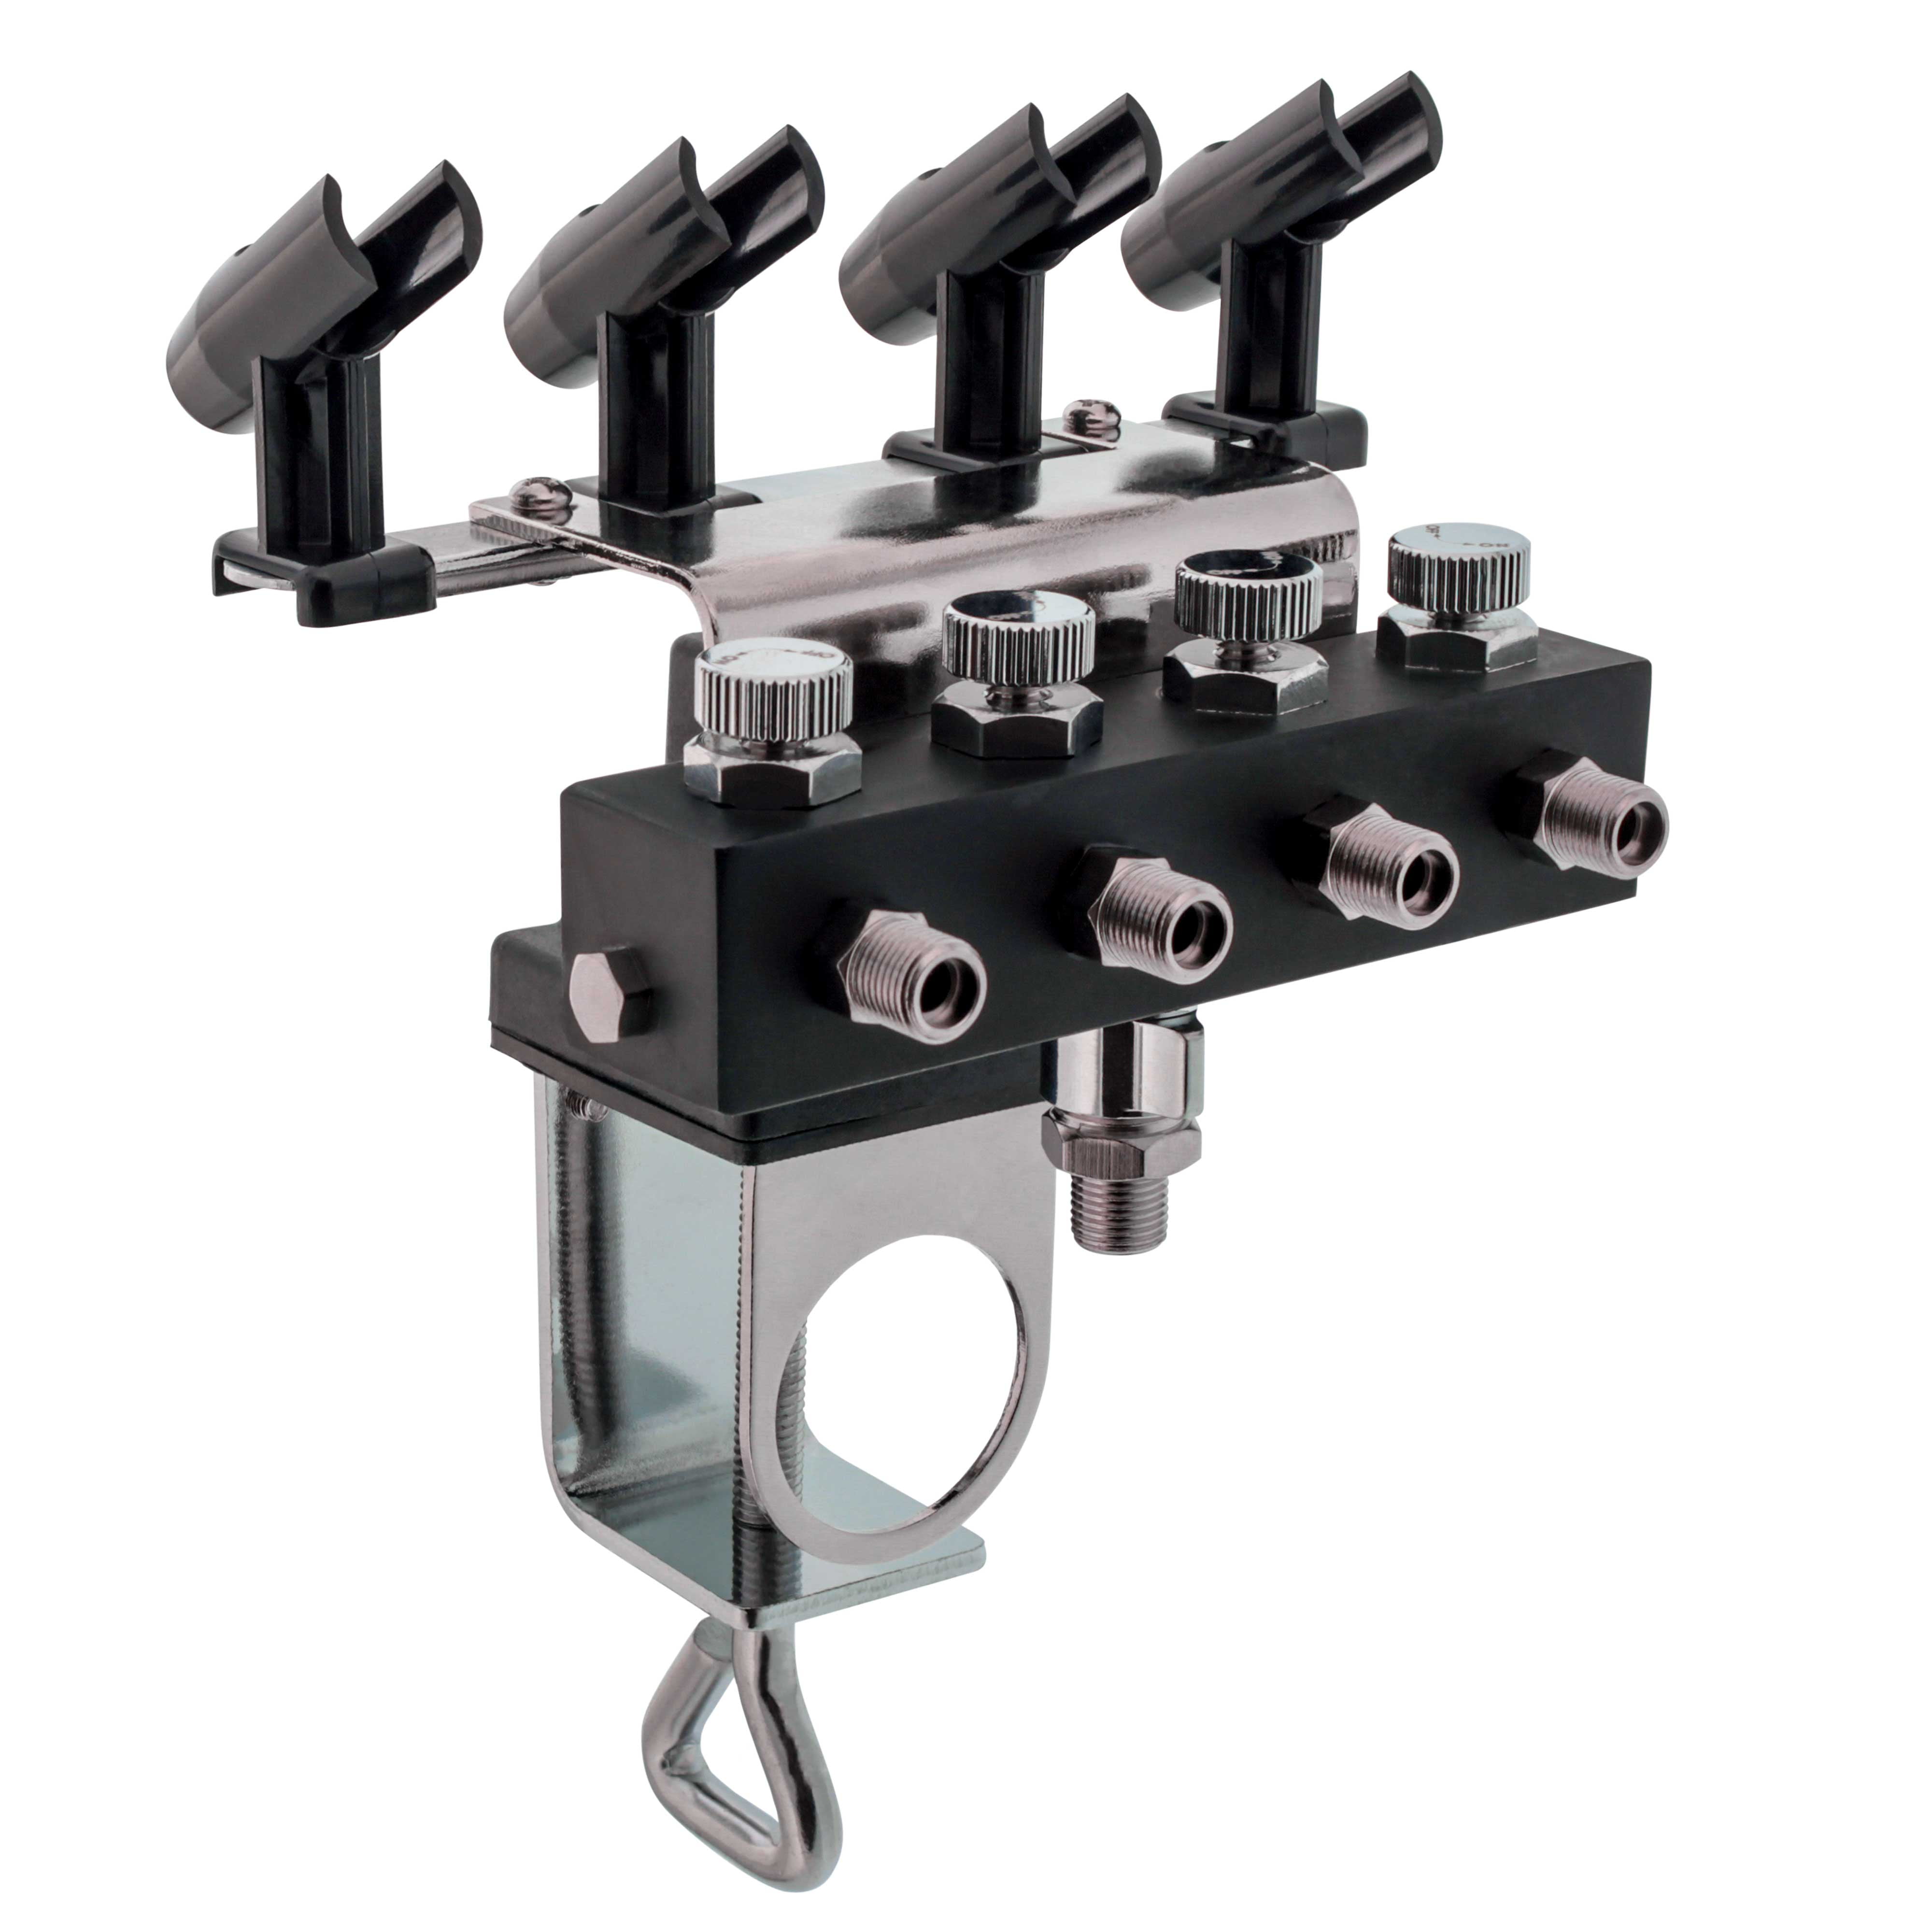 Universal Airbrush Holder, Clamp-on Airbrush Stand Keeps Airbrush Above  Table and Easy to Grab, No Airbrush